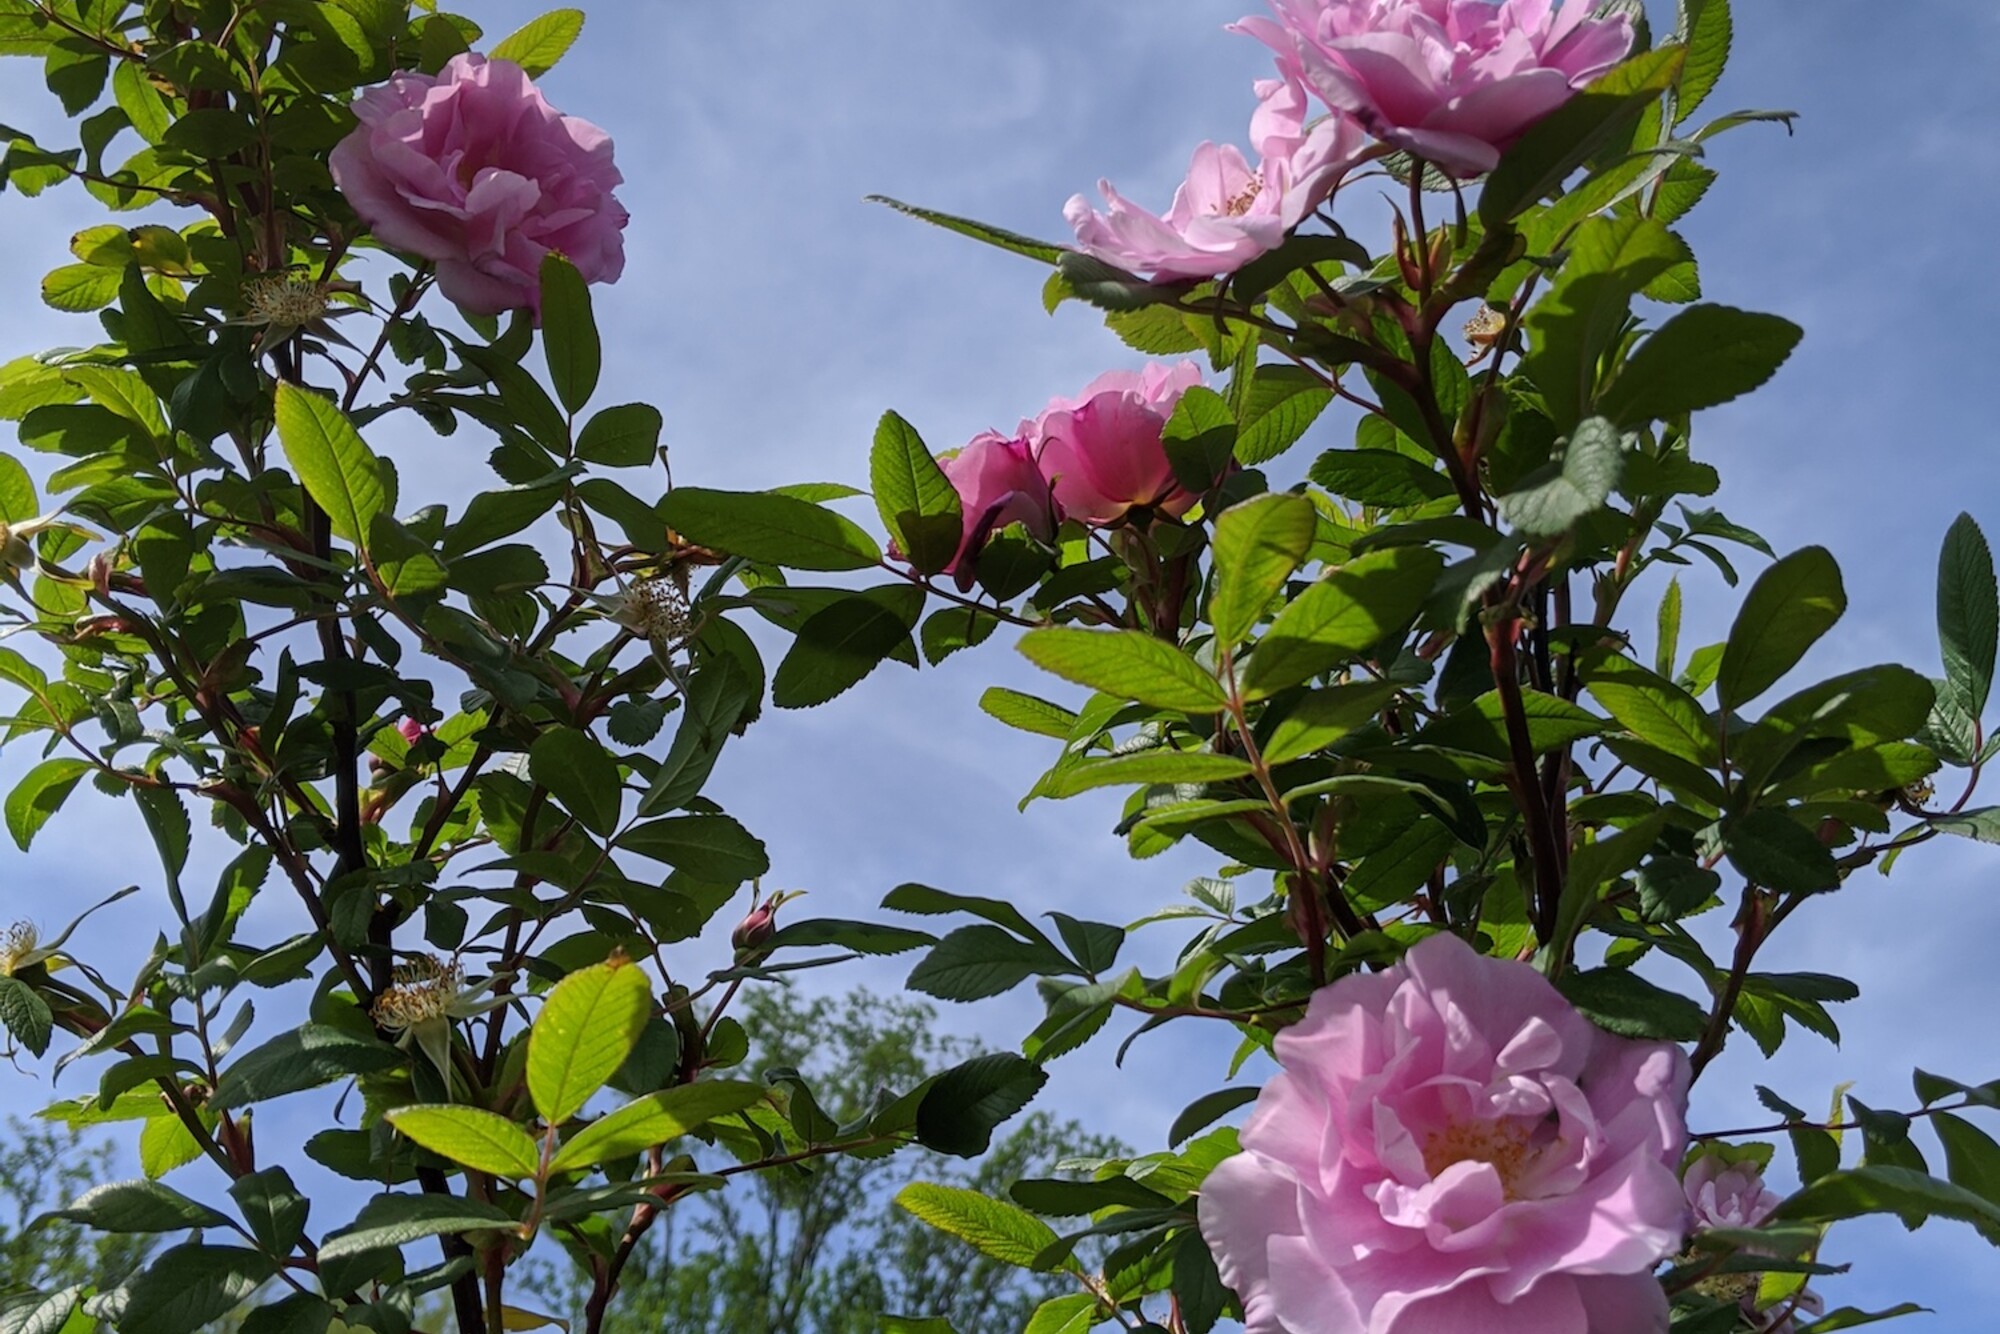 Pink roses against a blue sky